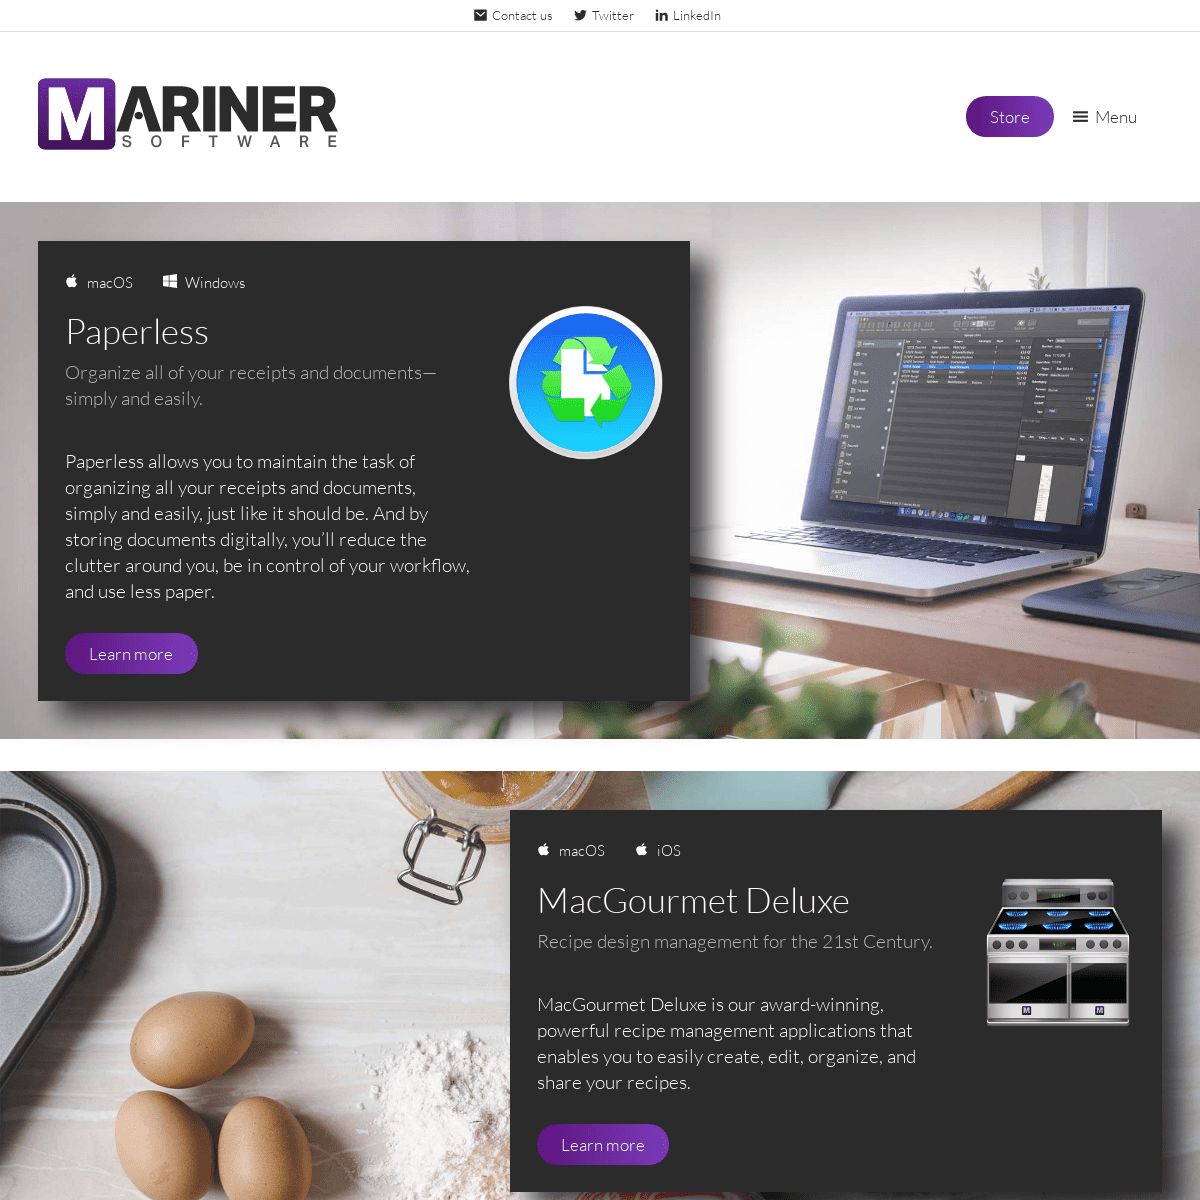 A complete backup of https://marinersoftware.com